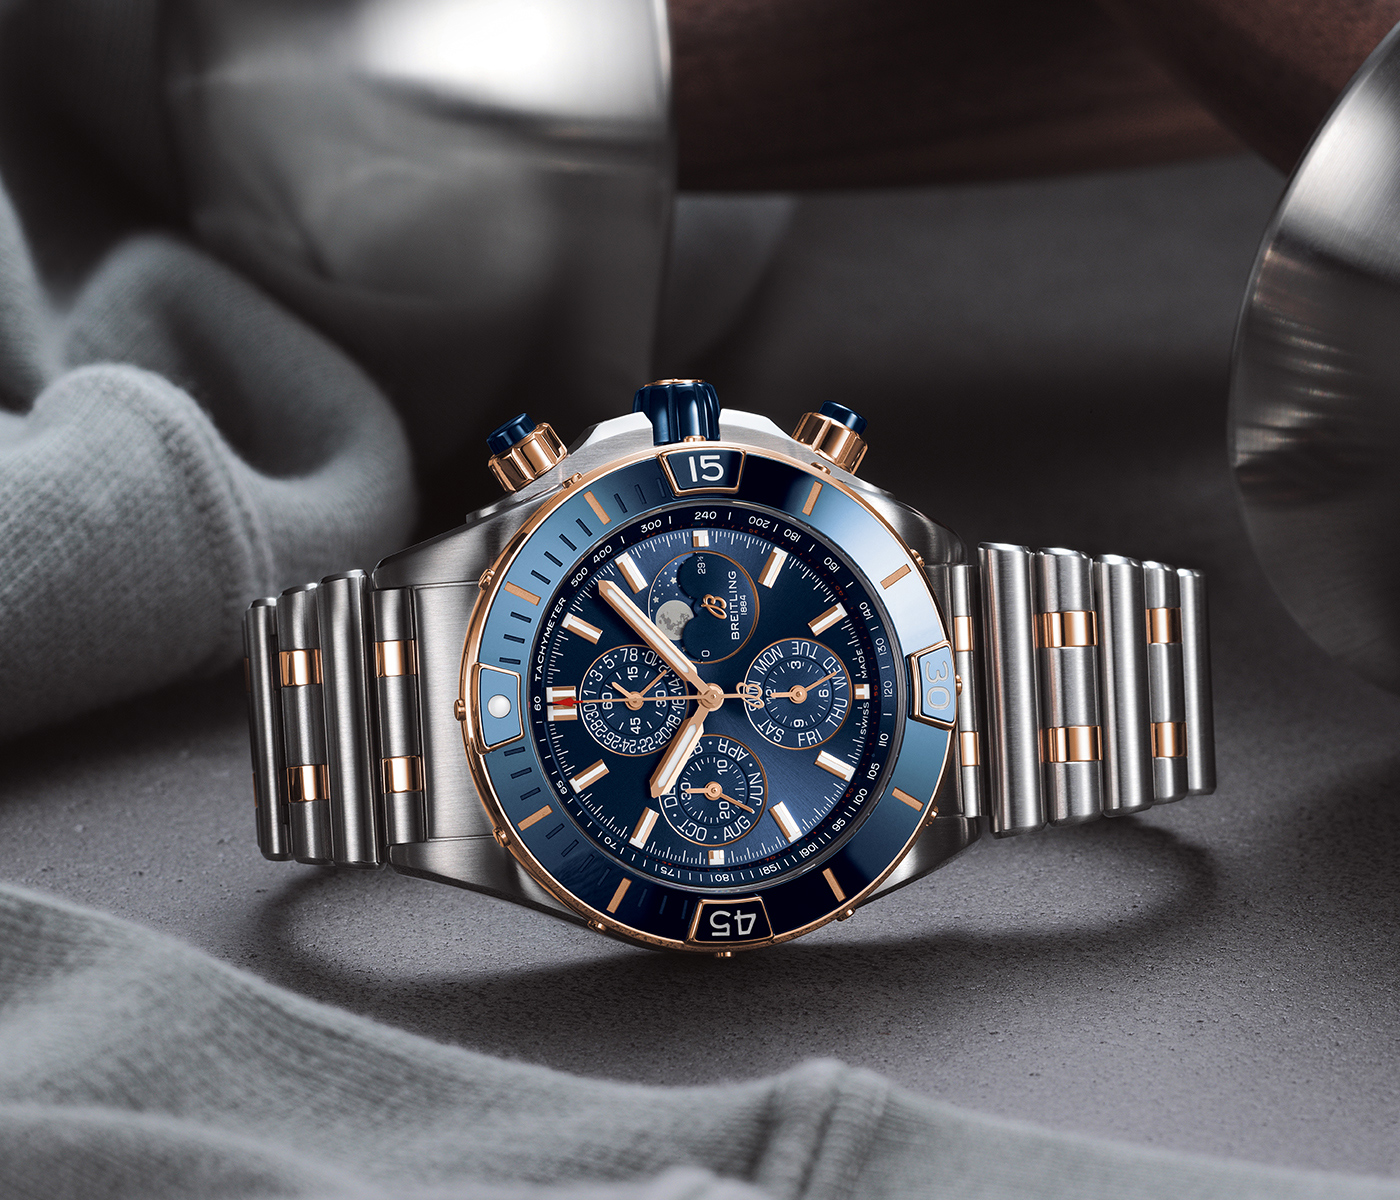 Breitling Watches | Shop Breitling Watches in Australia